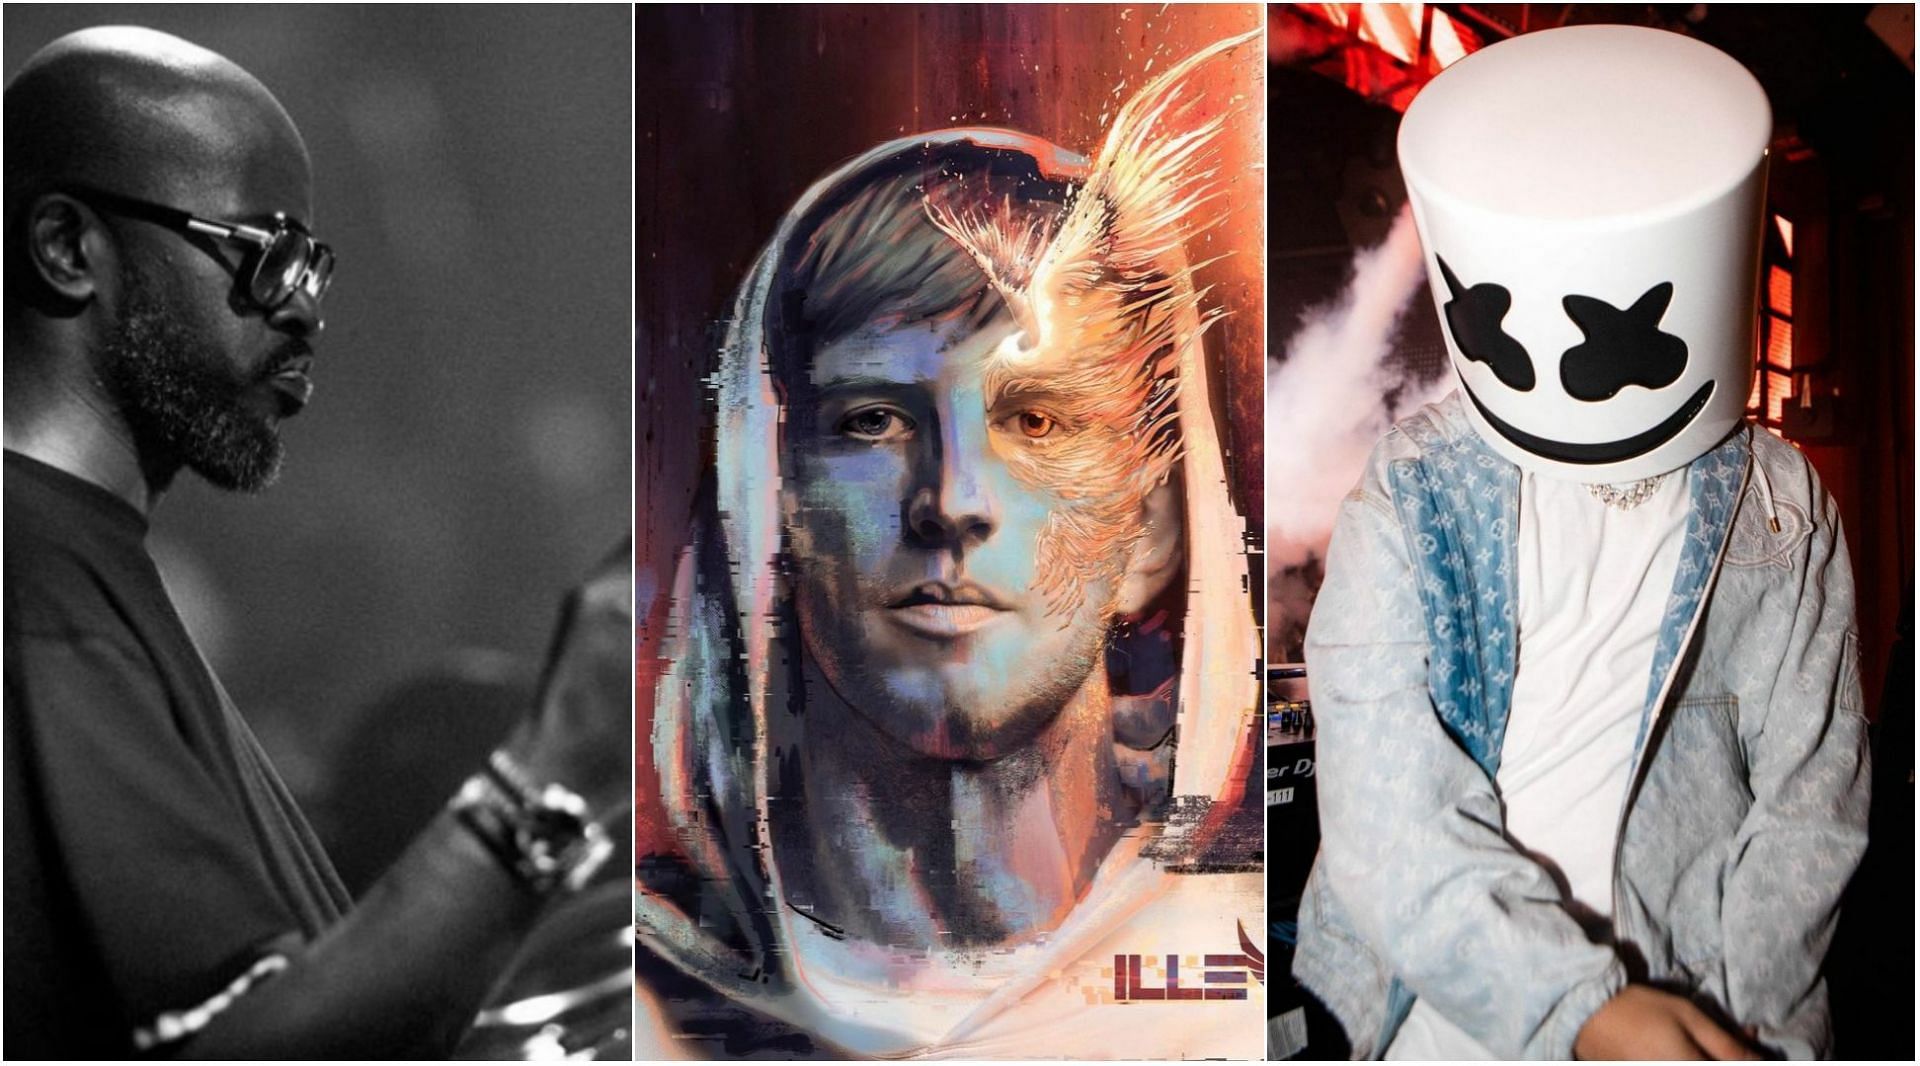 With the 2022 Grammys around the corner, the Dance/Electronic Album category is a hotly-contested one. (Images via Instagram: @realblackcoffee, @marshmello, @illenium)